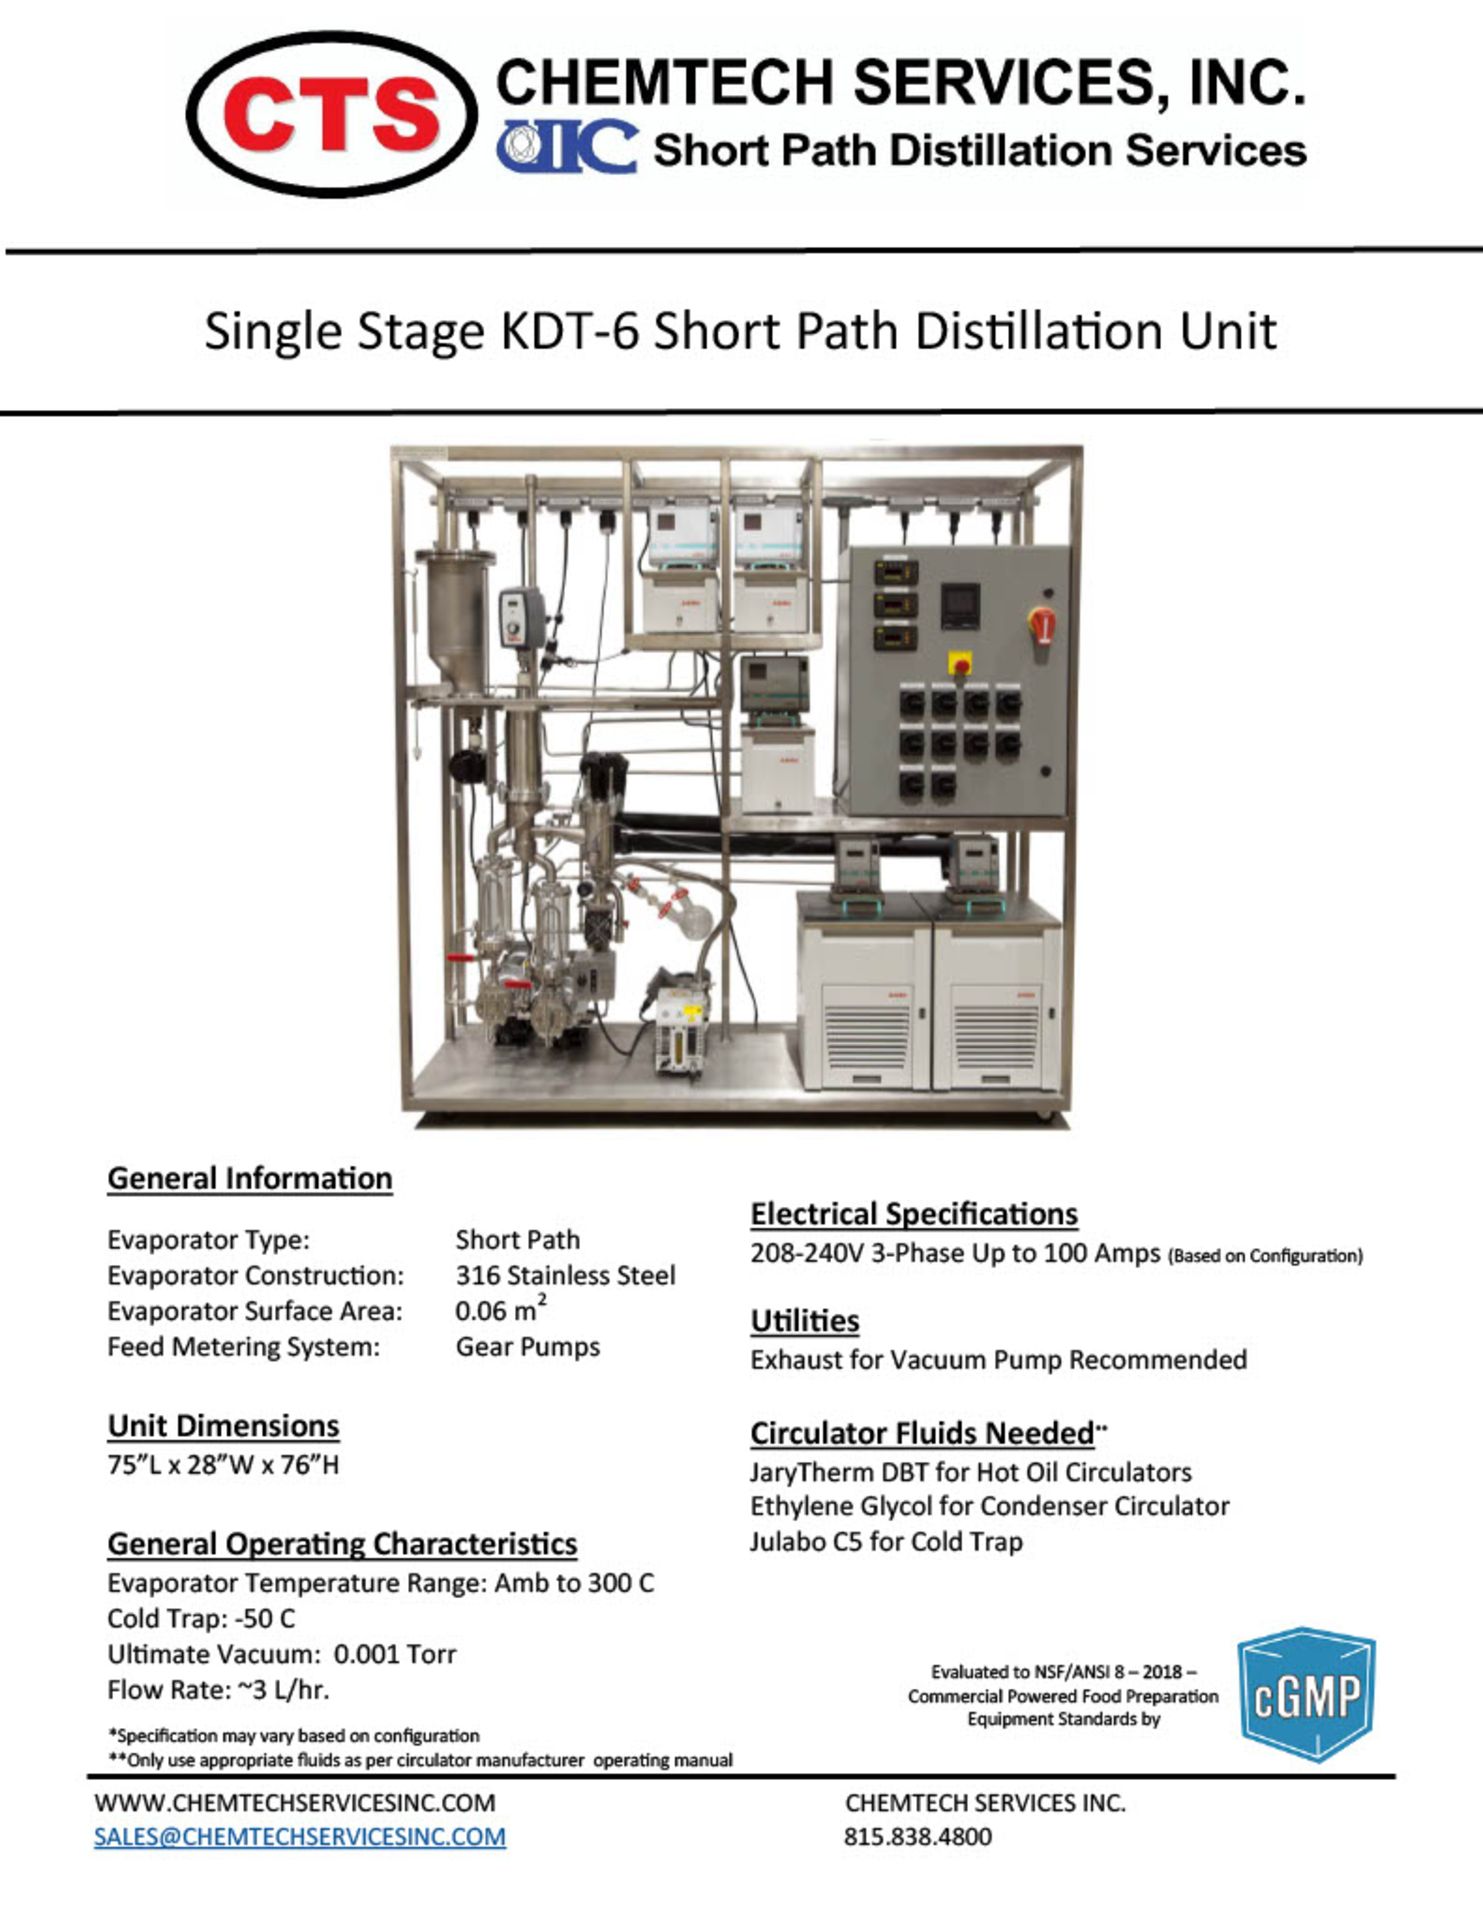 CHEM TECH SINGLE STAGE KDT6 SHORT PATH DISTILLATION UNIT LOCATED IN ROOM 24 - Image 14 of 15